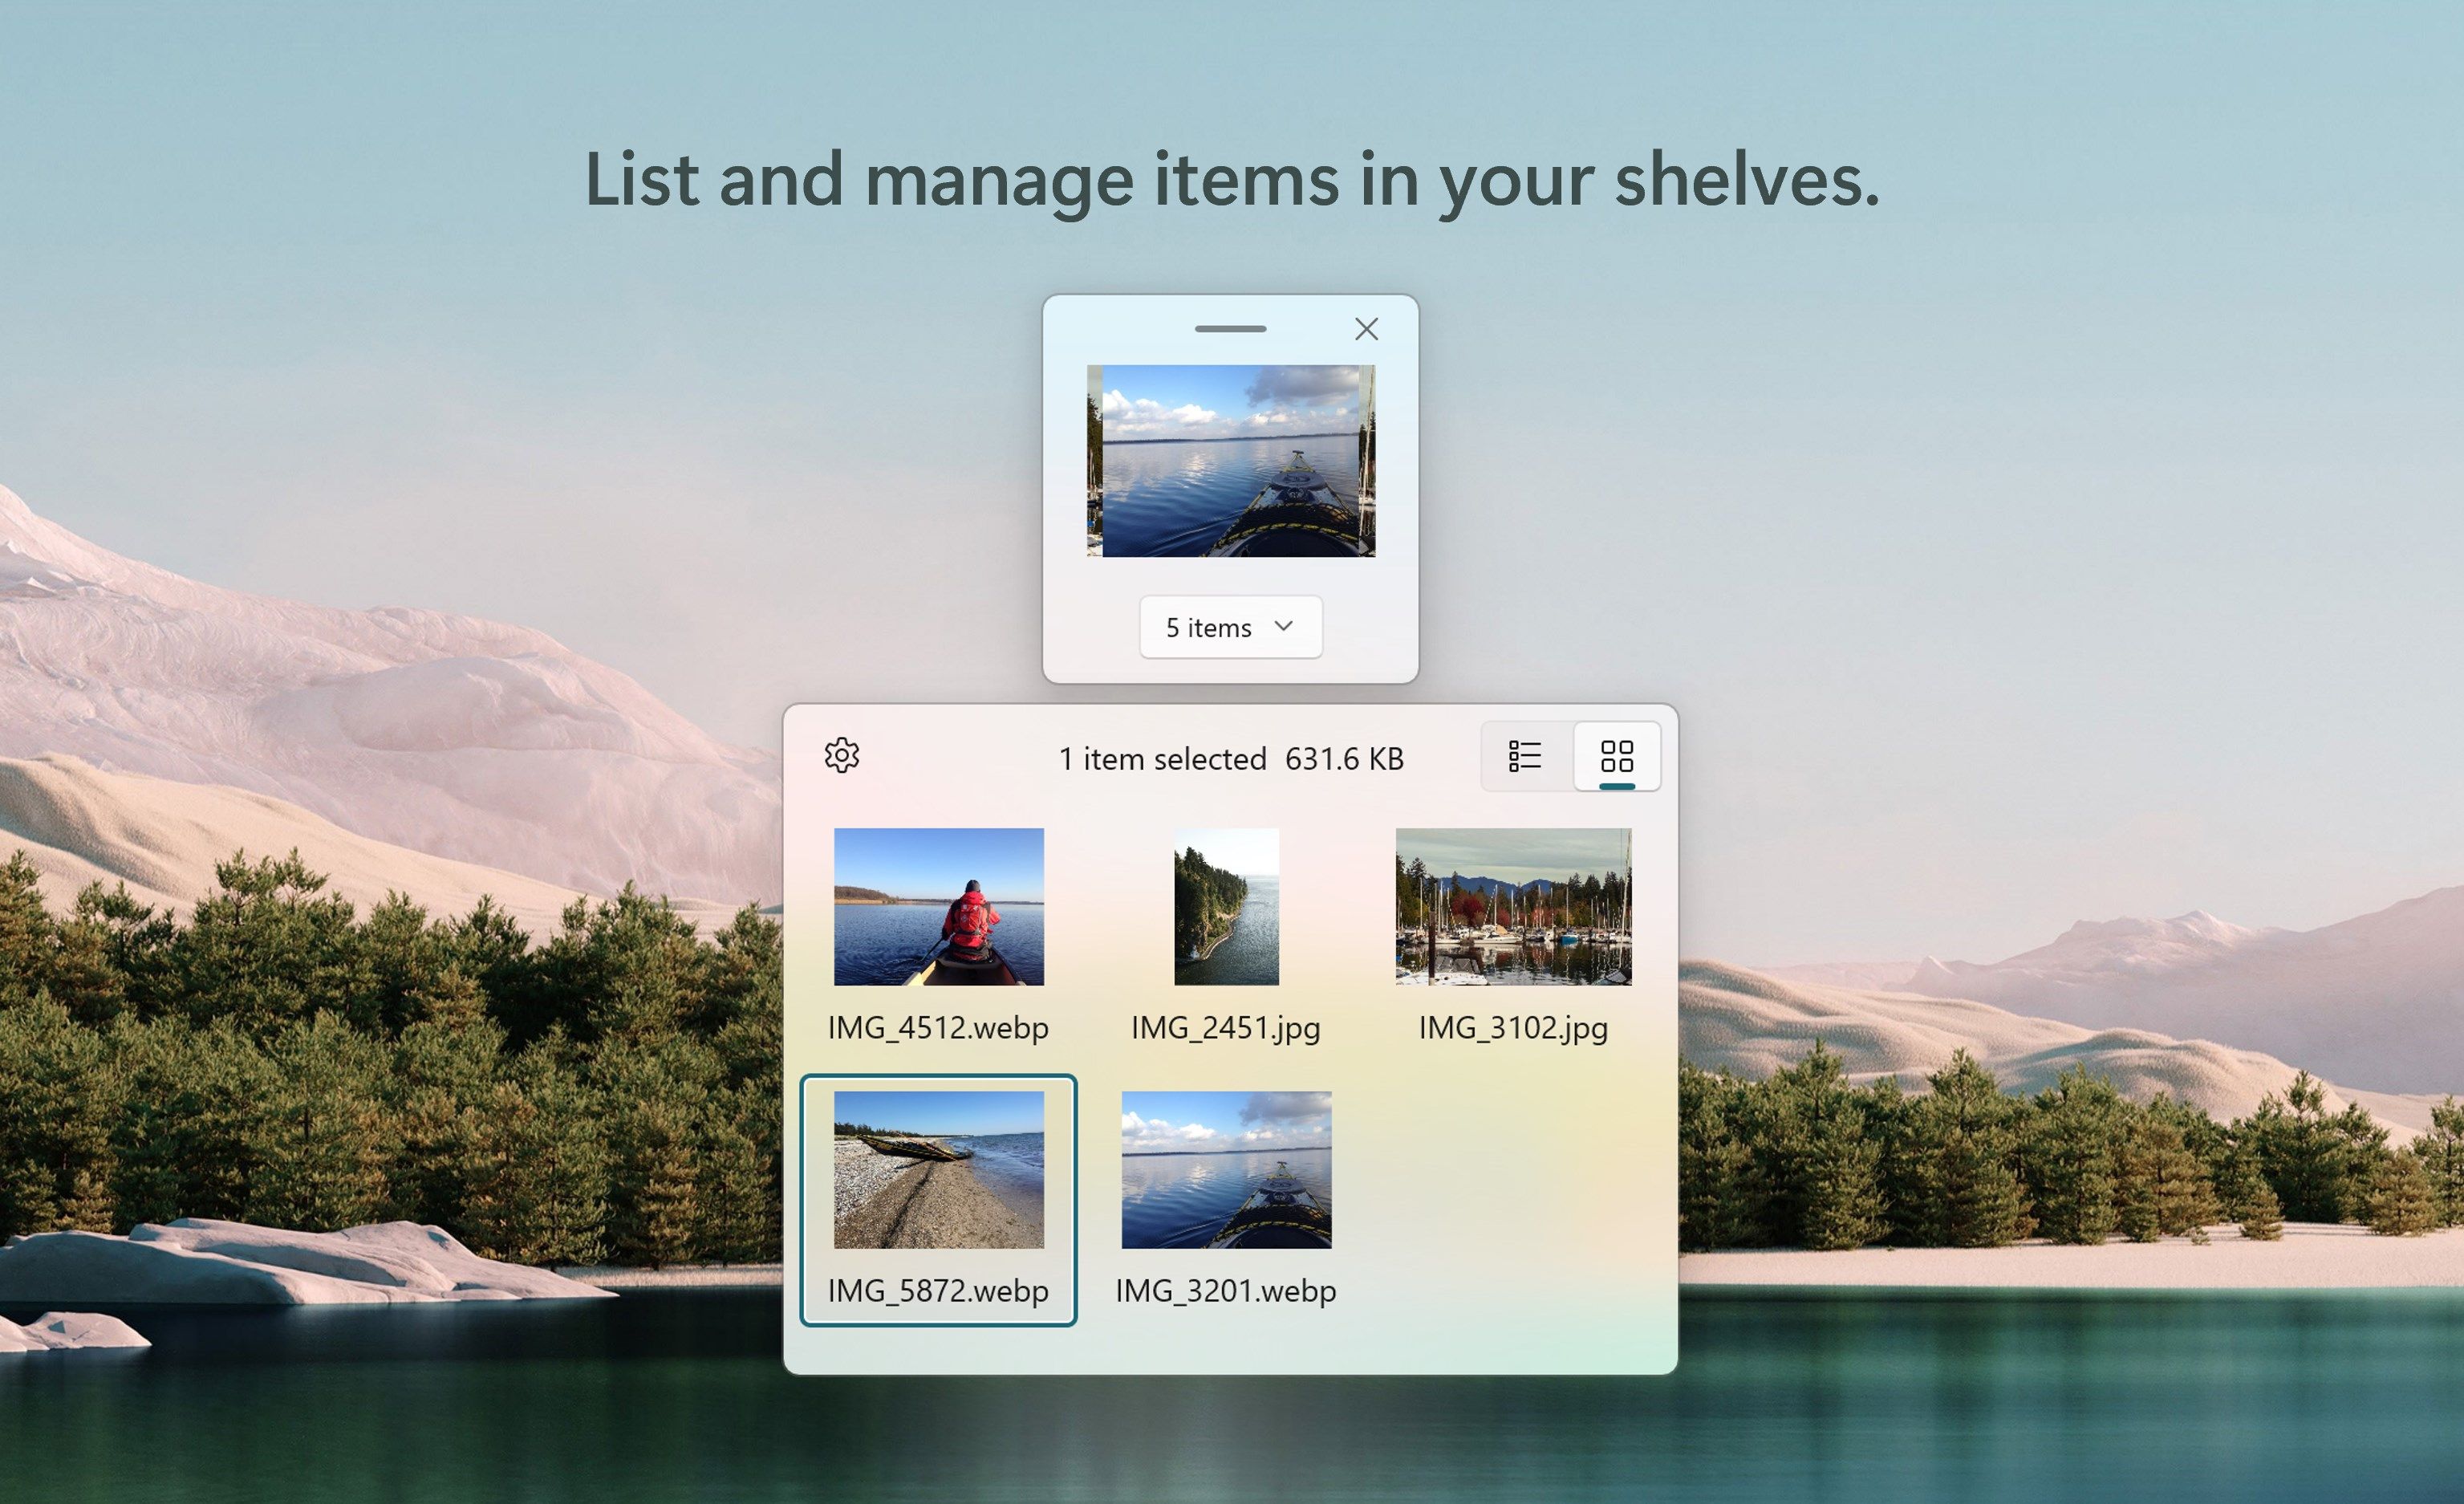 List and manage items in your shelves.